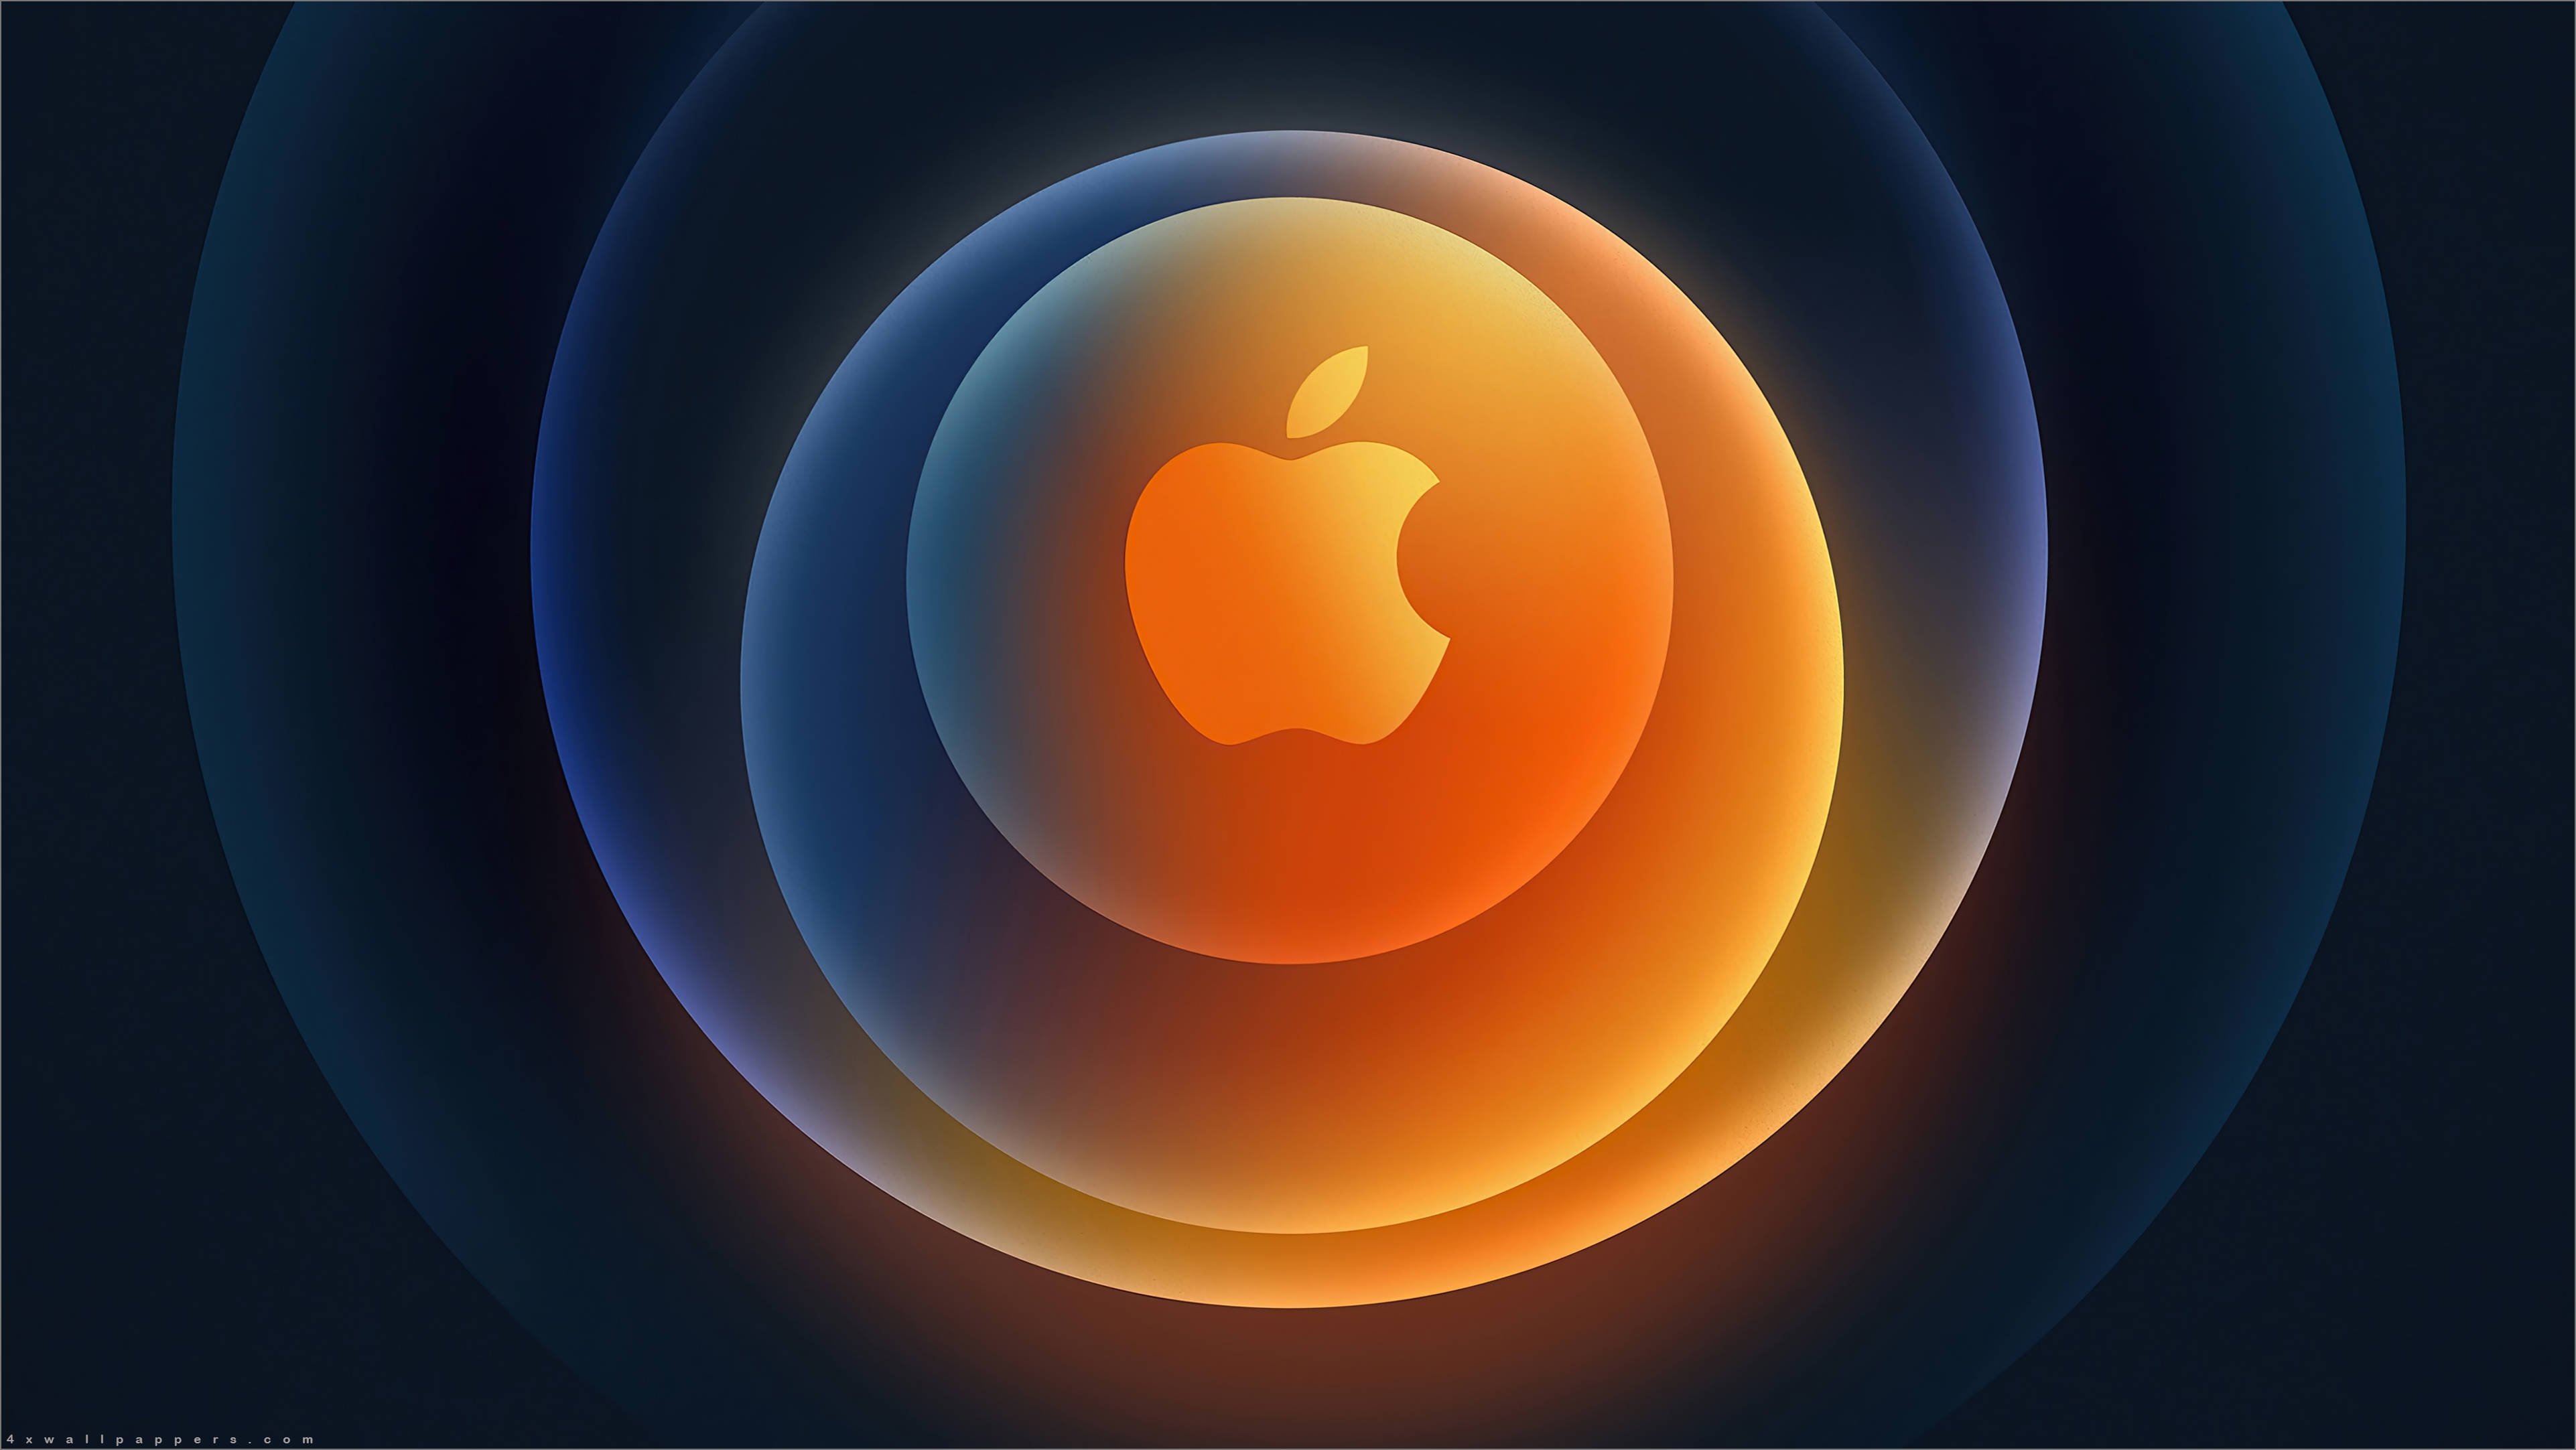 Apple Logo Wallpapers 4k With Sharp Beauty For Fans [FREE]